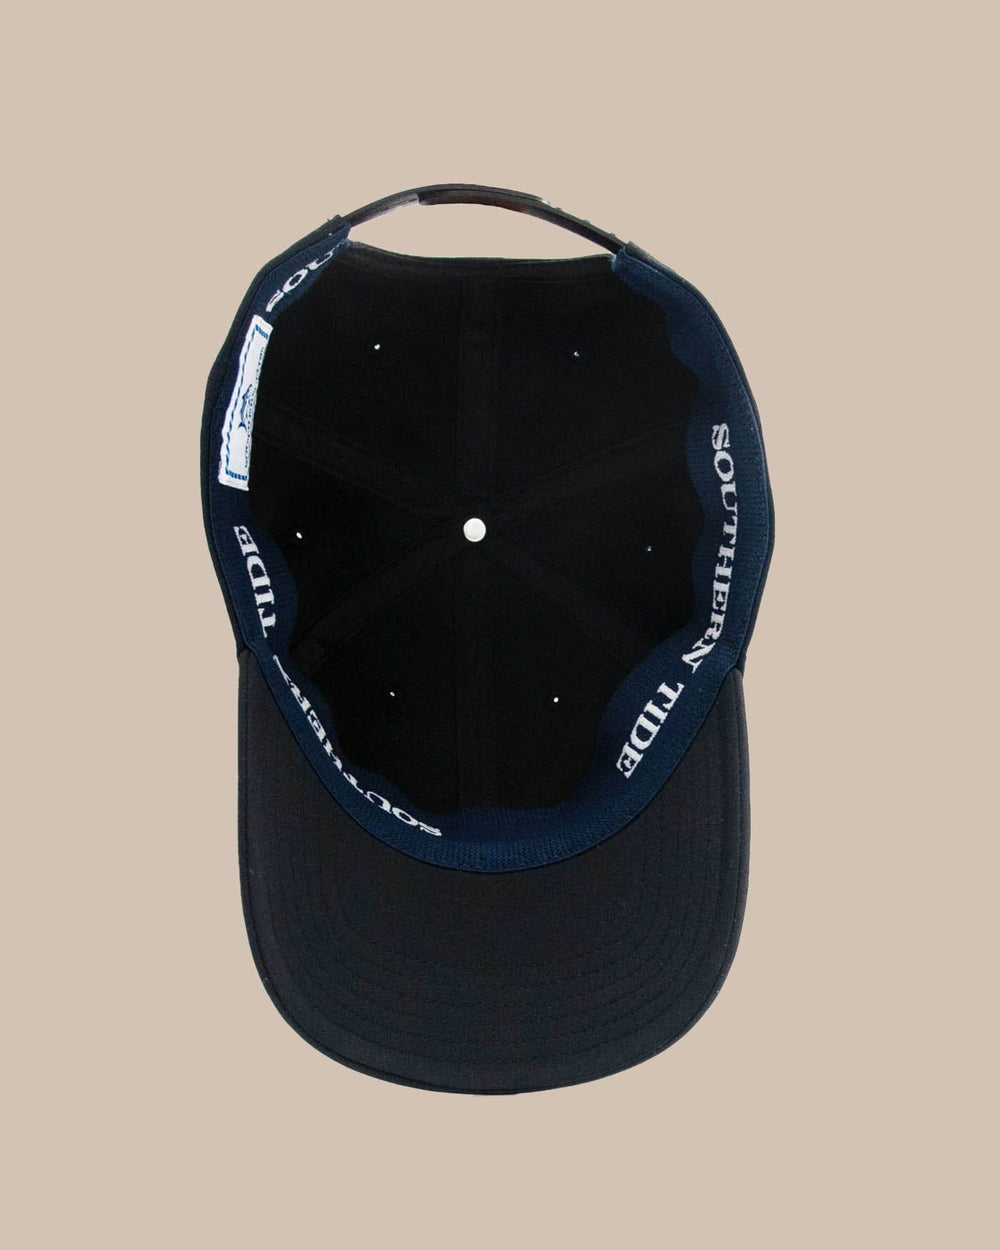 The detail view of the Southern Tide Rubber Skipjack Performance Hat by Southern Tide - Black